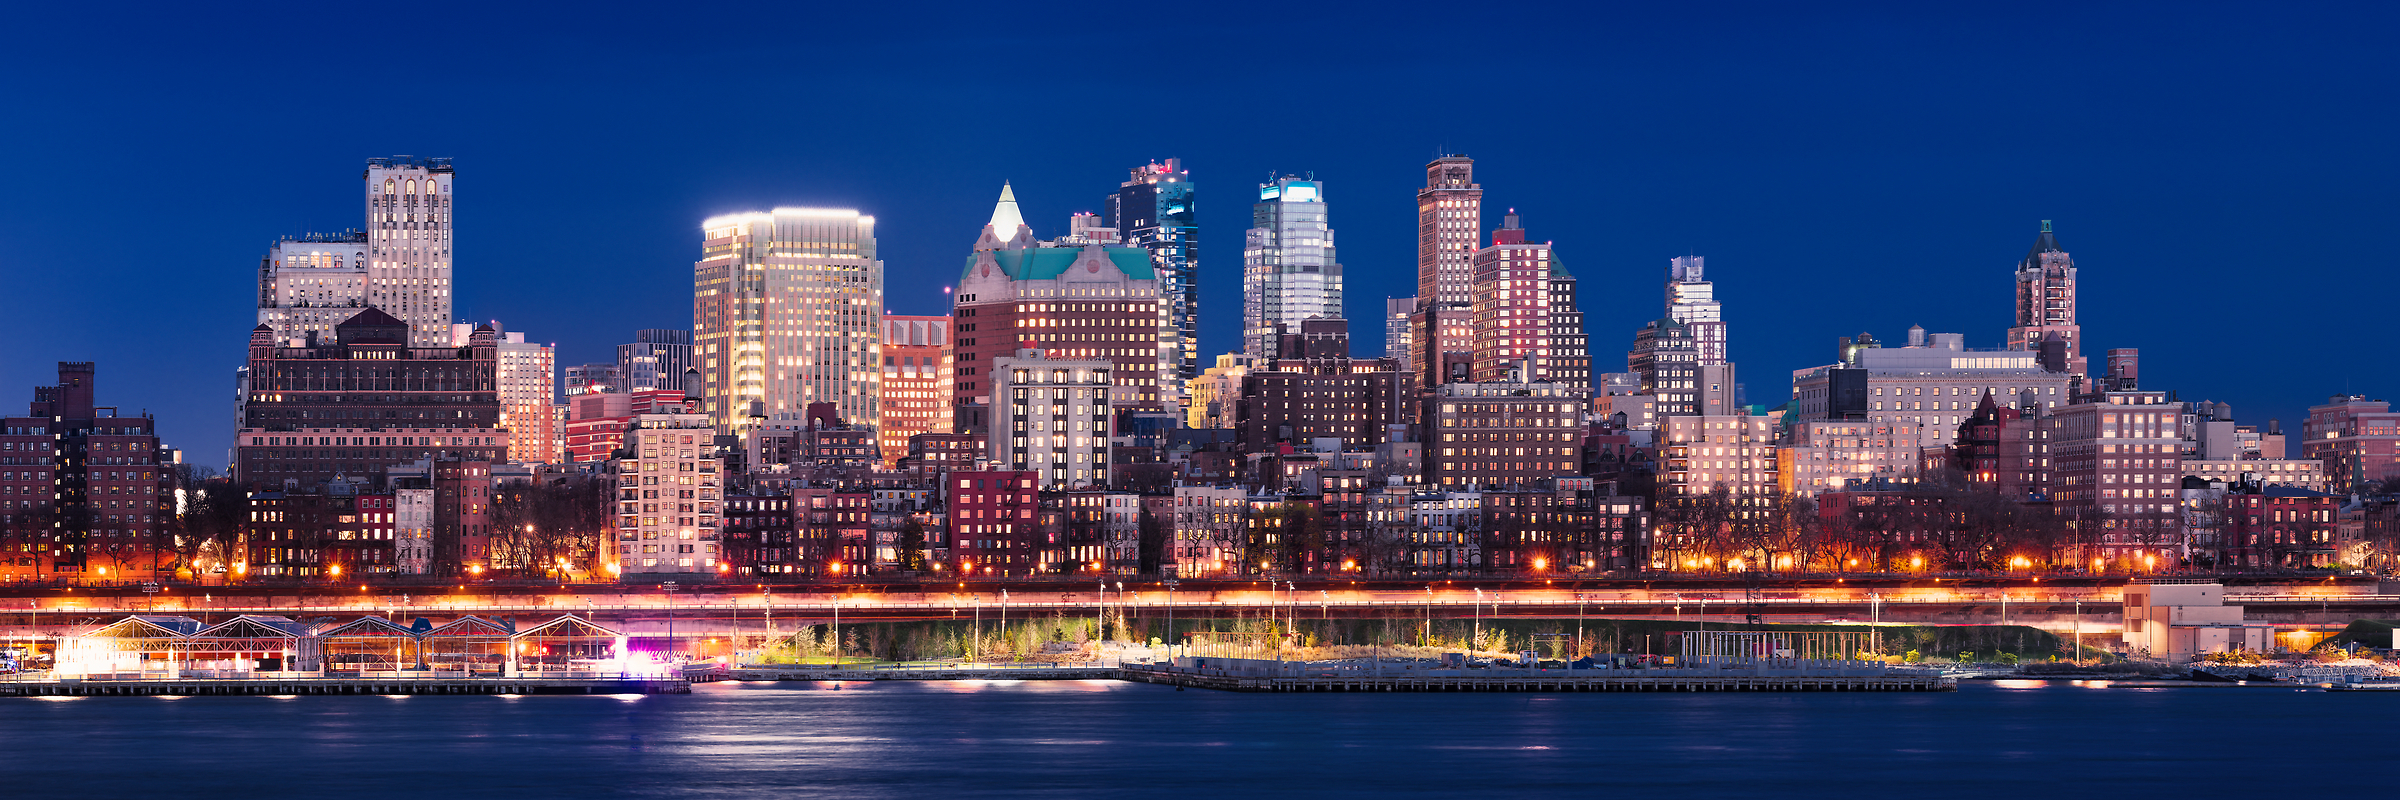 225 megapixels! A very high resolution, large-format VAST photo of the Downtown Brooklyn and Brooklyn Heights skyline at sunset dusk; fine art cityscape photograph created by Dan Piech in New York City